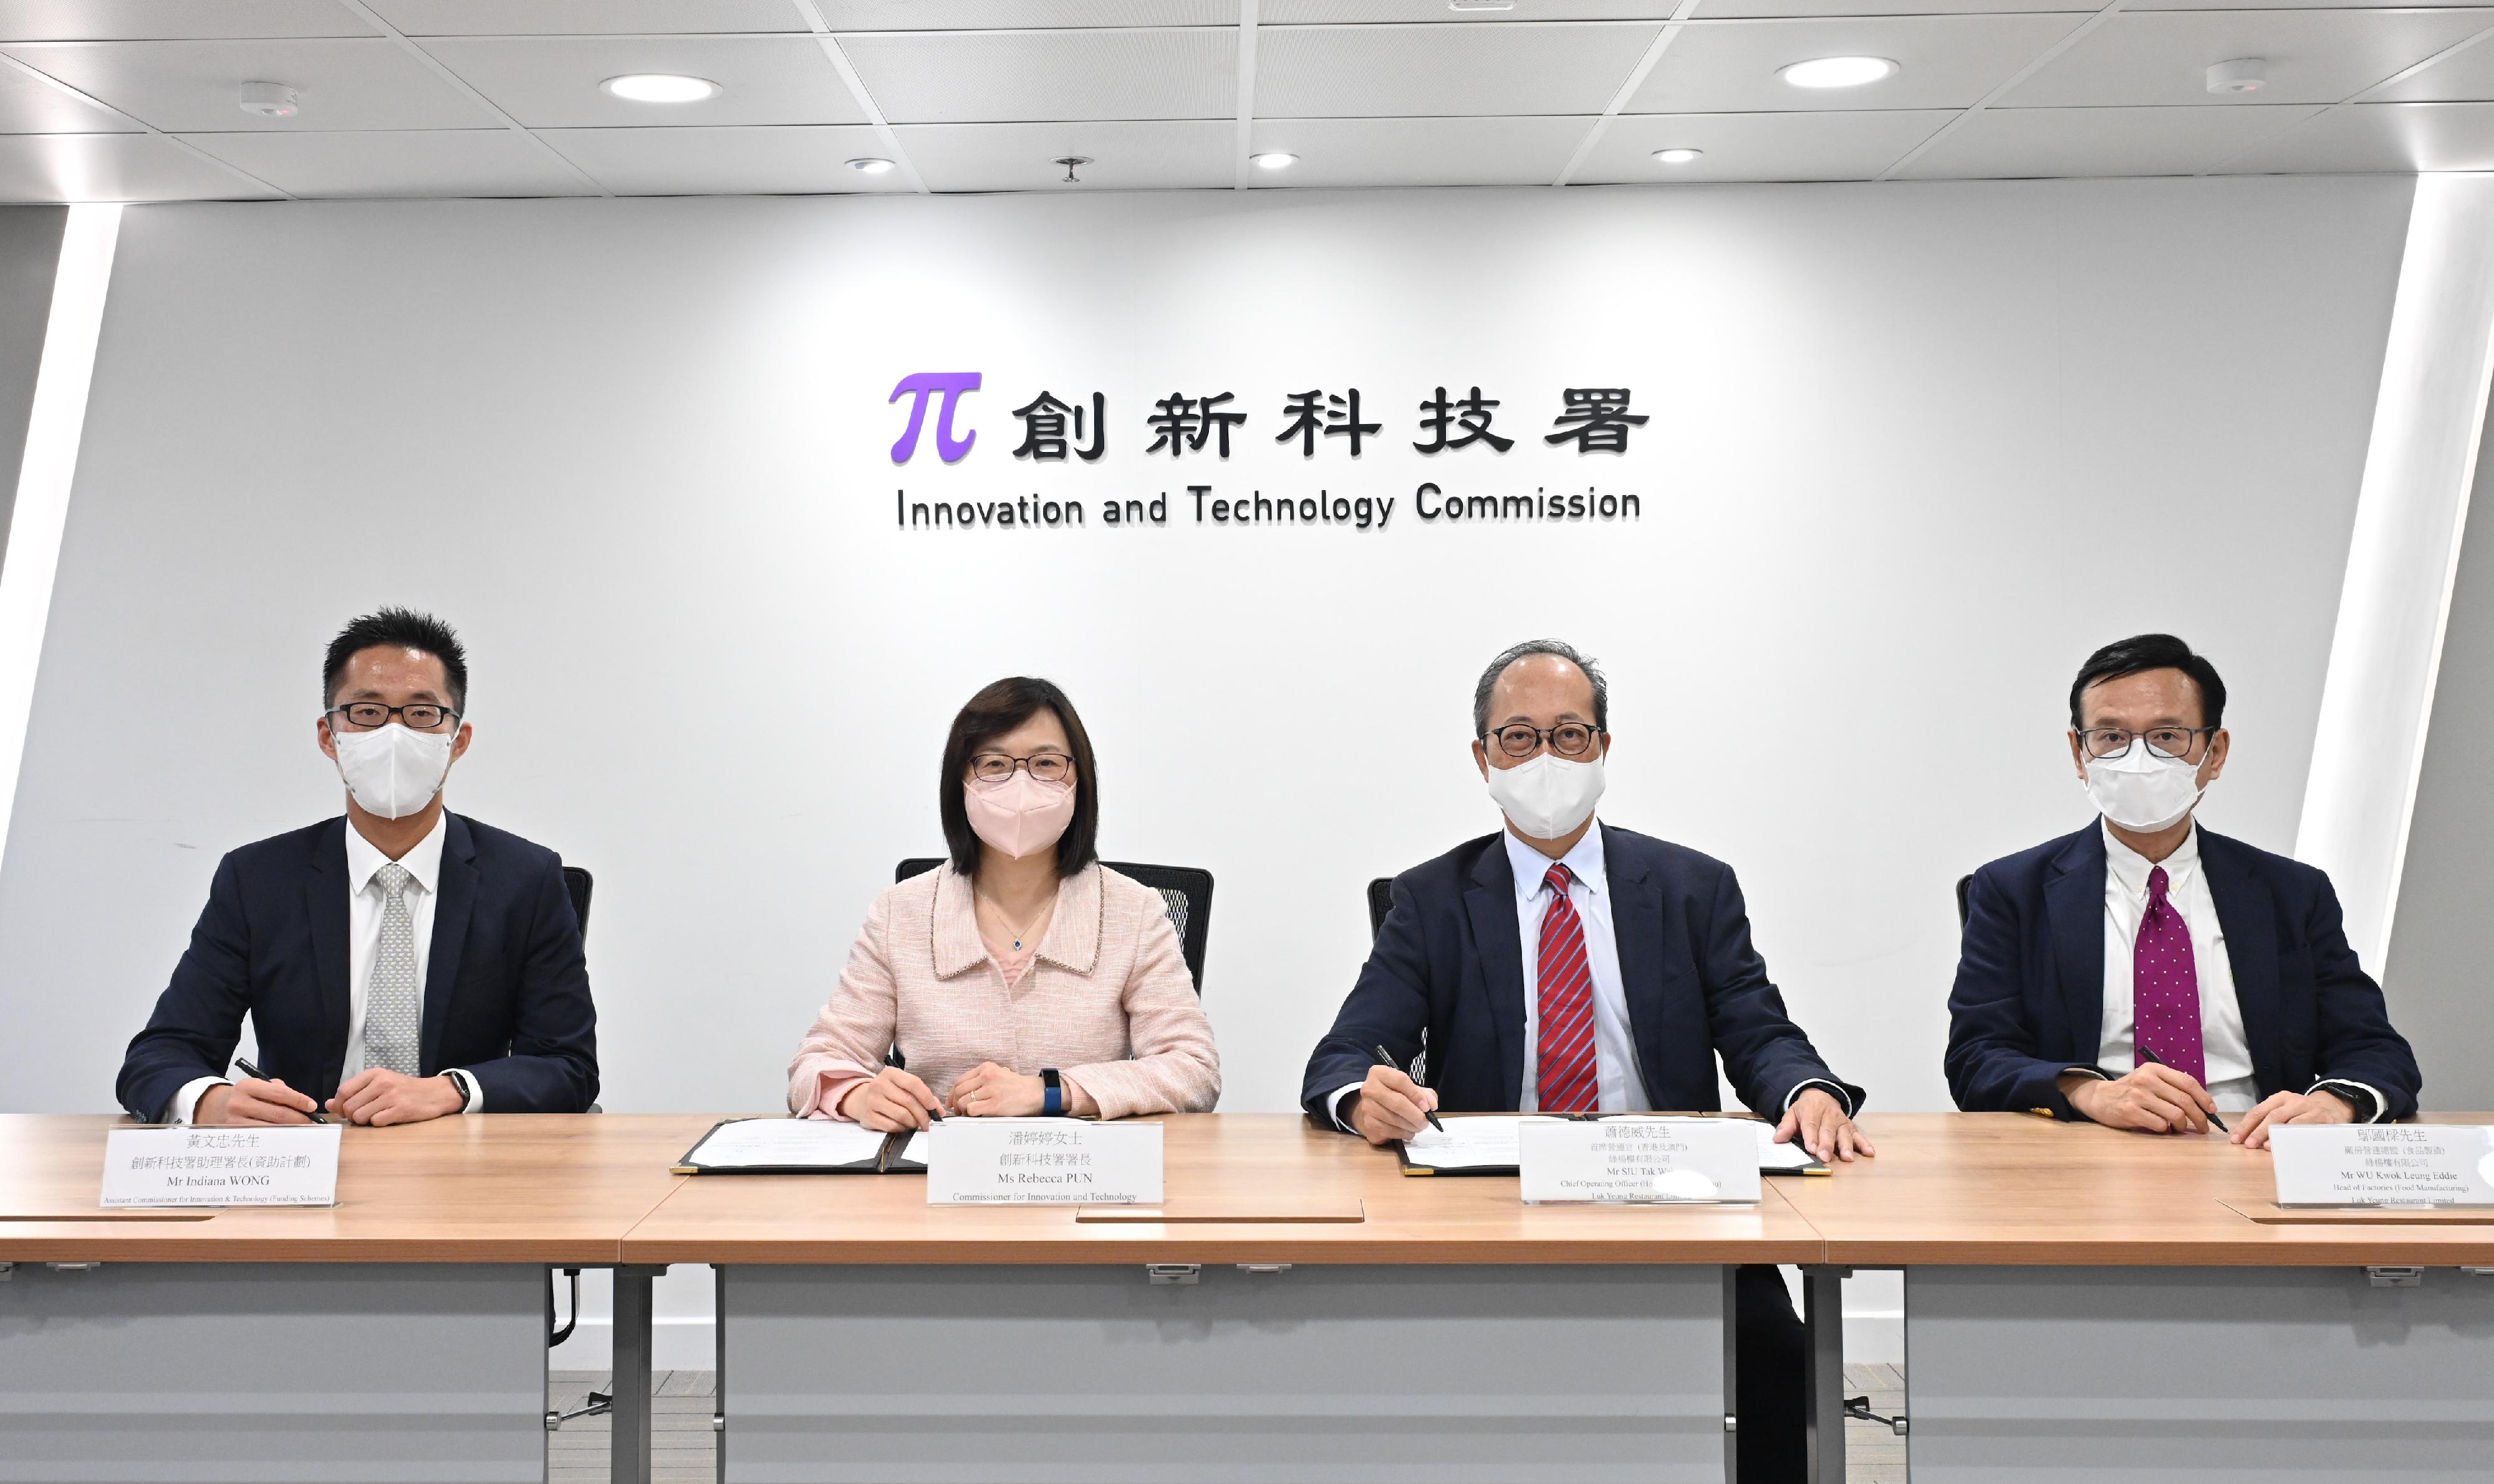 The Re-industrialisation Funding Scheme has approved funding for a project by Luk Yeung Restaurant Limited to set up a smart production line for mooncake products. Photo shows the Commissioner for Innovation and Technology, Ms Rebecca Pun (second left); the Assistant Commissioner for Innovation and Technology (Funding Schemes), Mr Indiana Wong (first left); the Chief Operating Officer (Hong Kong and Macau) of Luk Yeung Restaurant Limited, Mr Keith Siu (second right); and the Head of Factories (Food Manufacturing) of Luk Yeung Restaurant Limited, Mr Eddie Wu (first right), attending the signing ceremony of the funding agreement today (February 9).